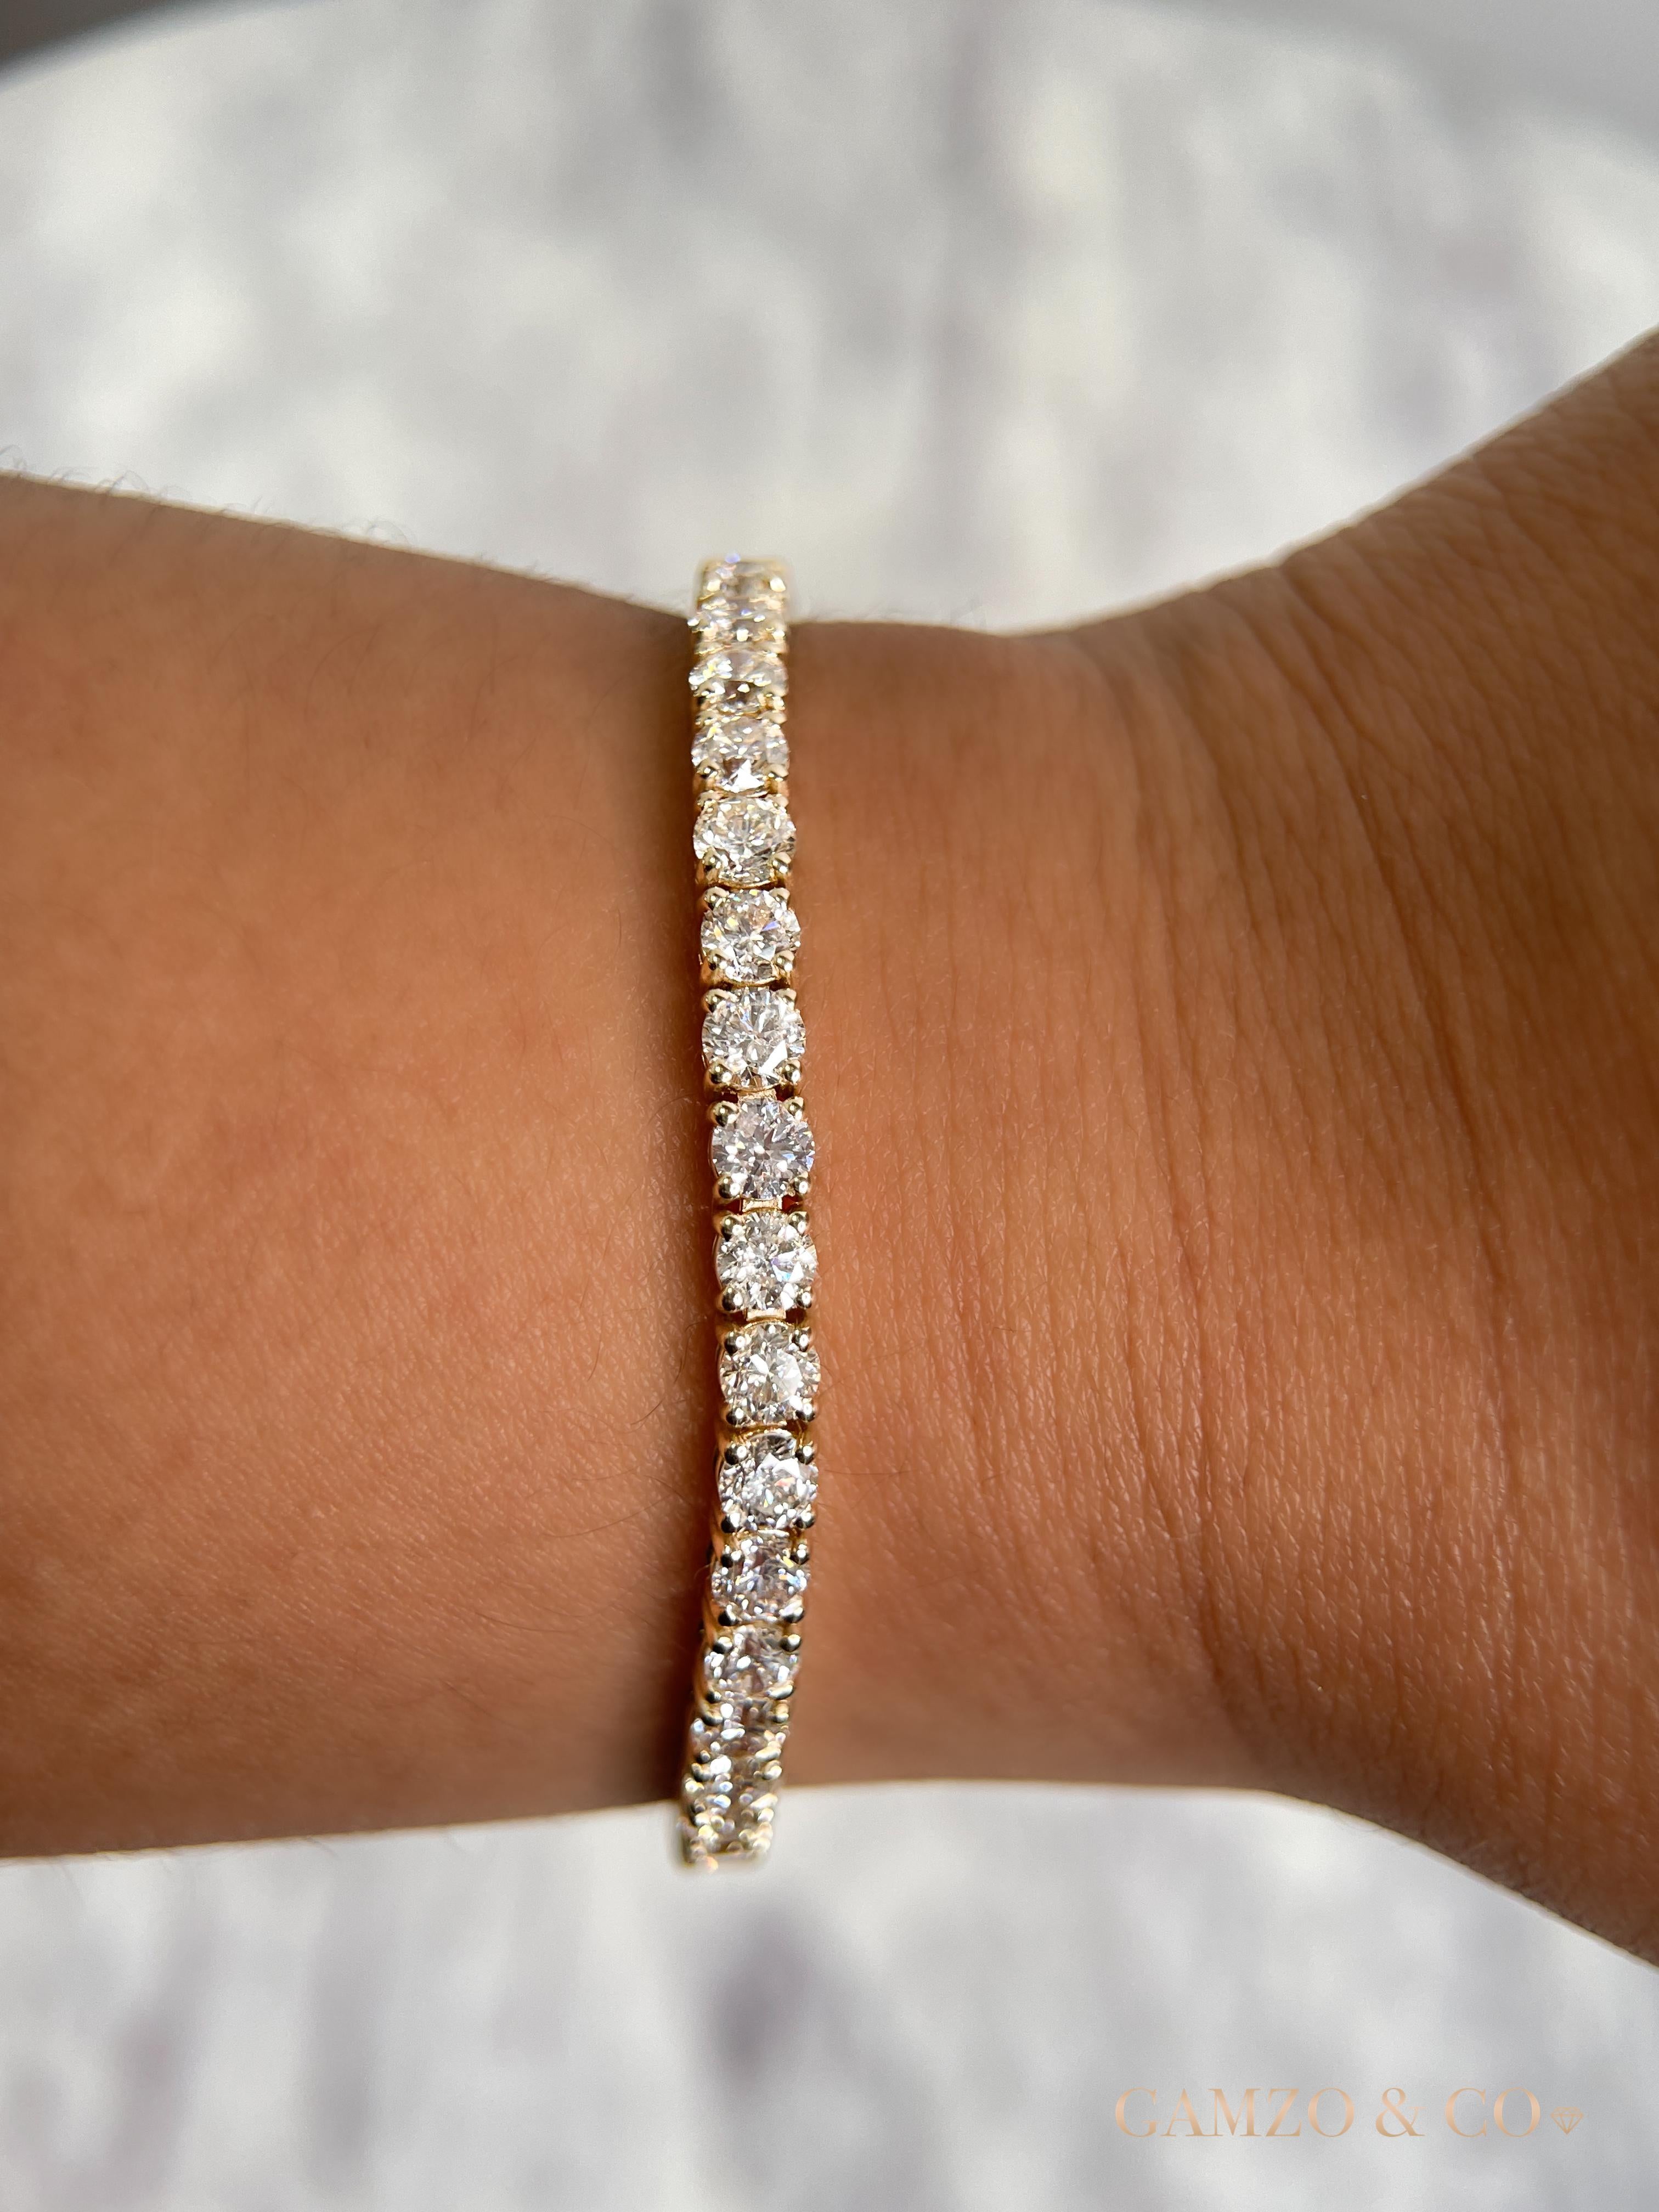 This diamond tennis bracelet features beautifully cut round diamonds set gorgeously in 14k gold.

Metal: 14k Gold
Diamond Cut: Round Natural Diamond 
Total Diamond Carats: 9ct
Diamond Clarity: VS
Diamond Color: F-G
Color: White Gold
Bracelet Length: